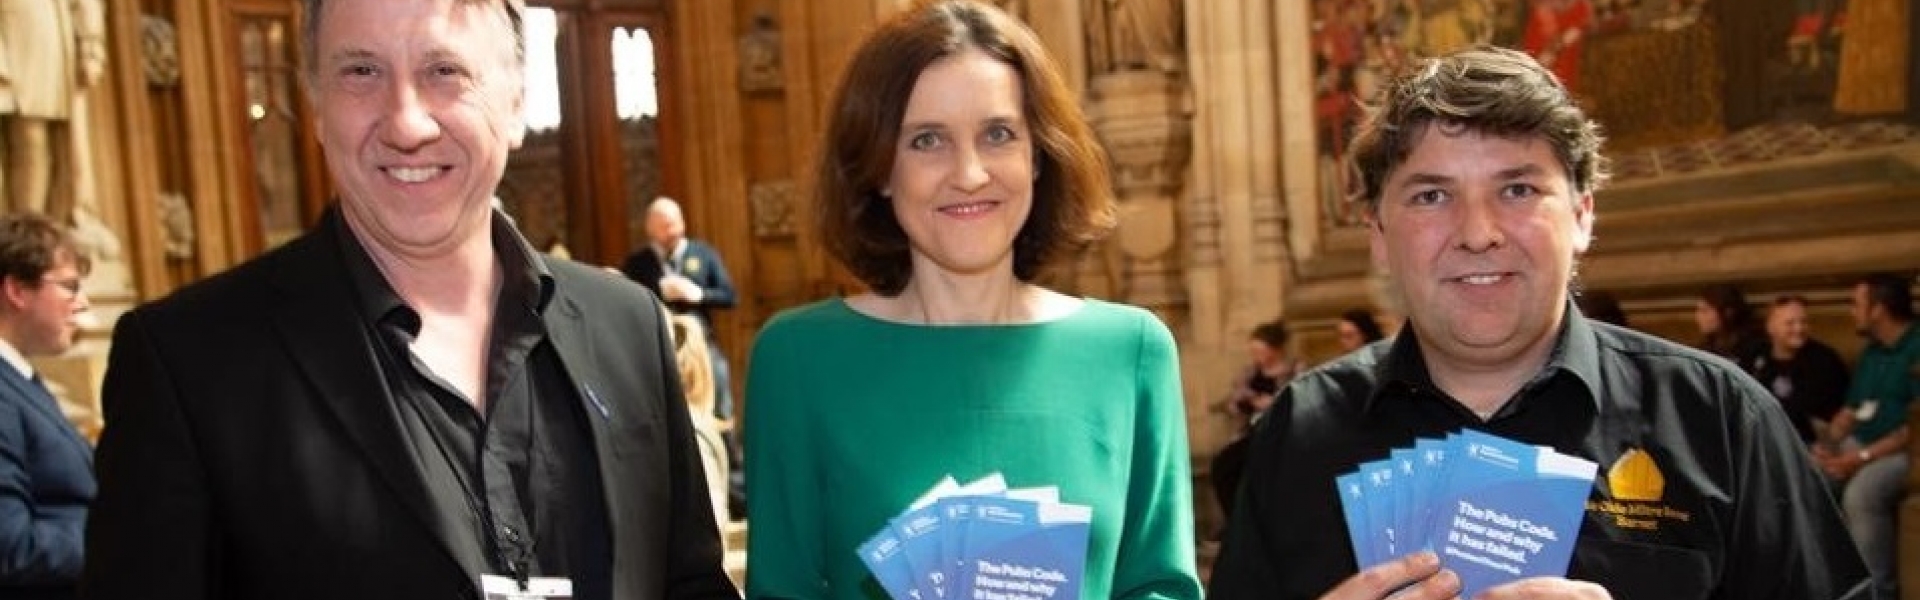 Theresa Villiers meets Pubs Code campaigners